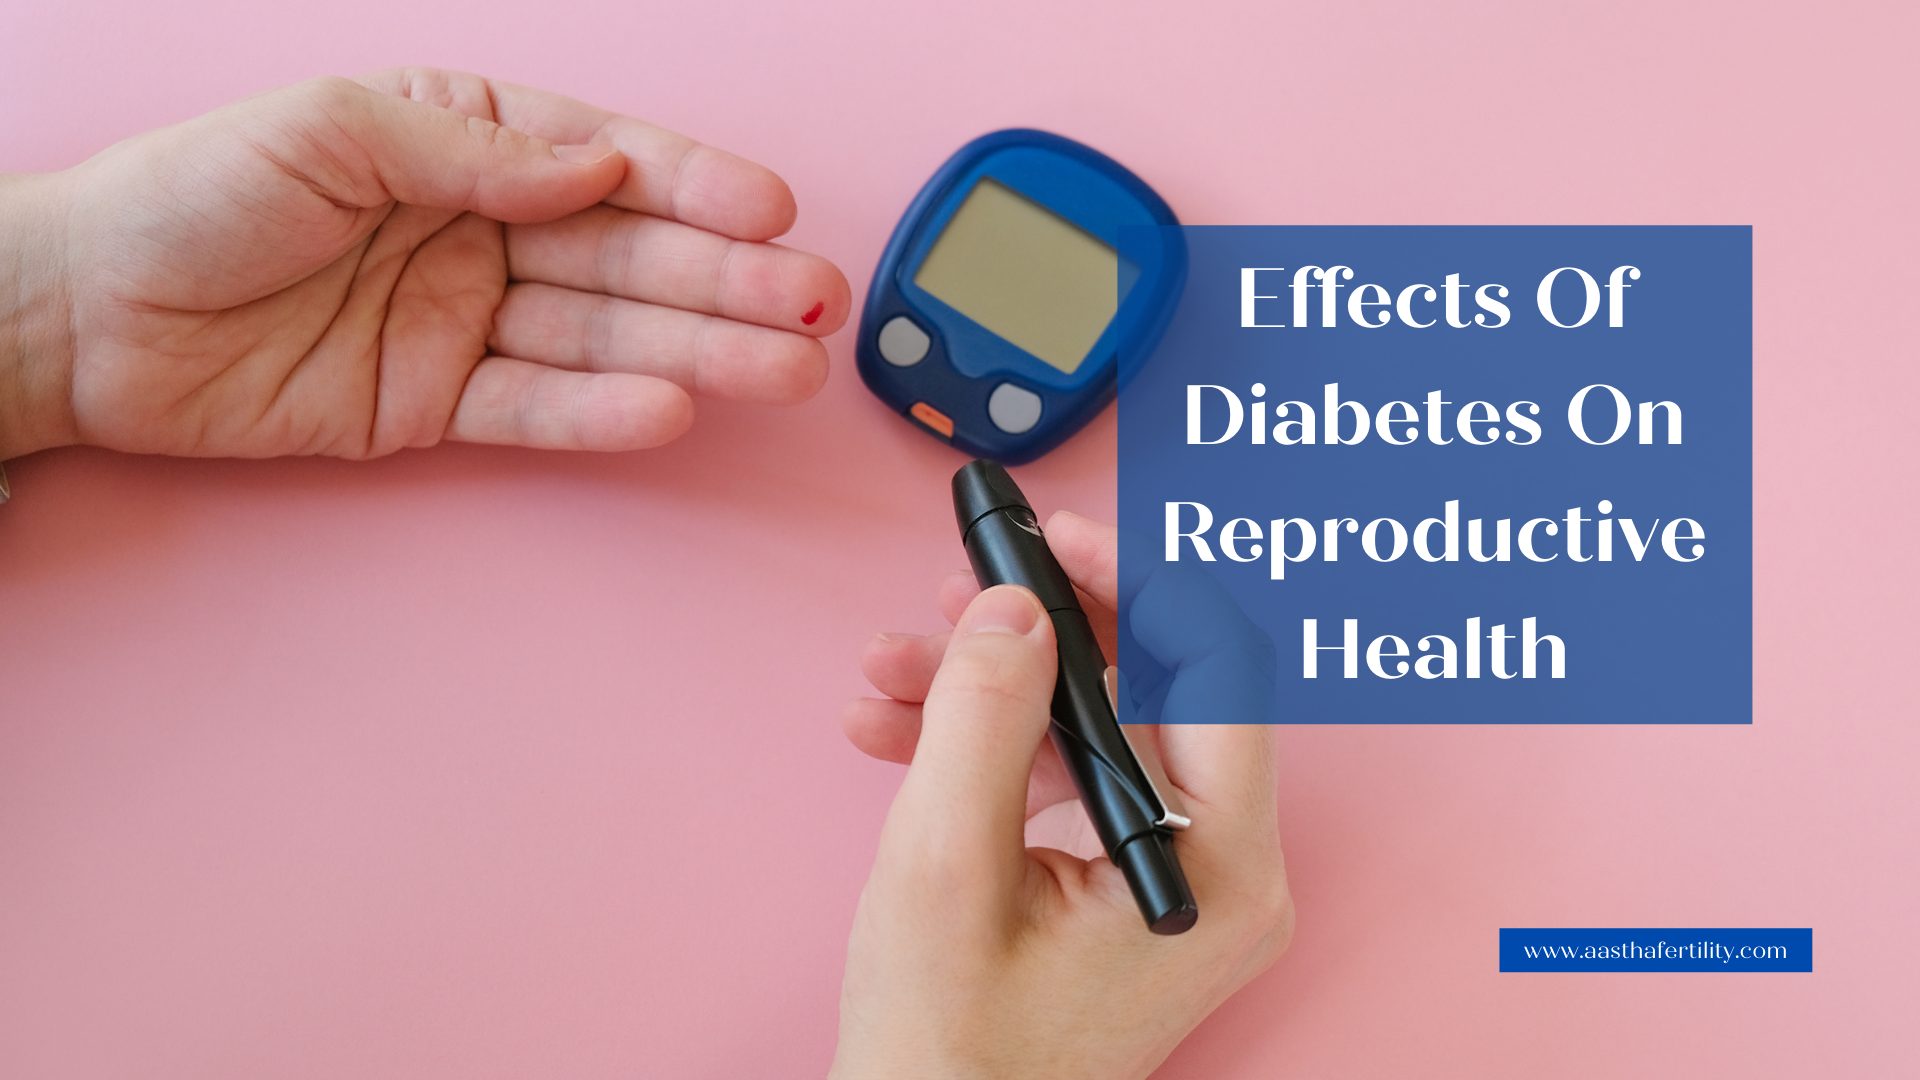 Effects Of Diabetes On Reproductive Health